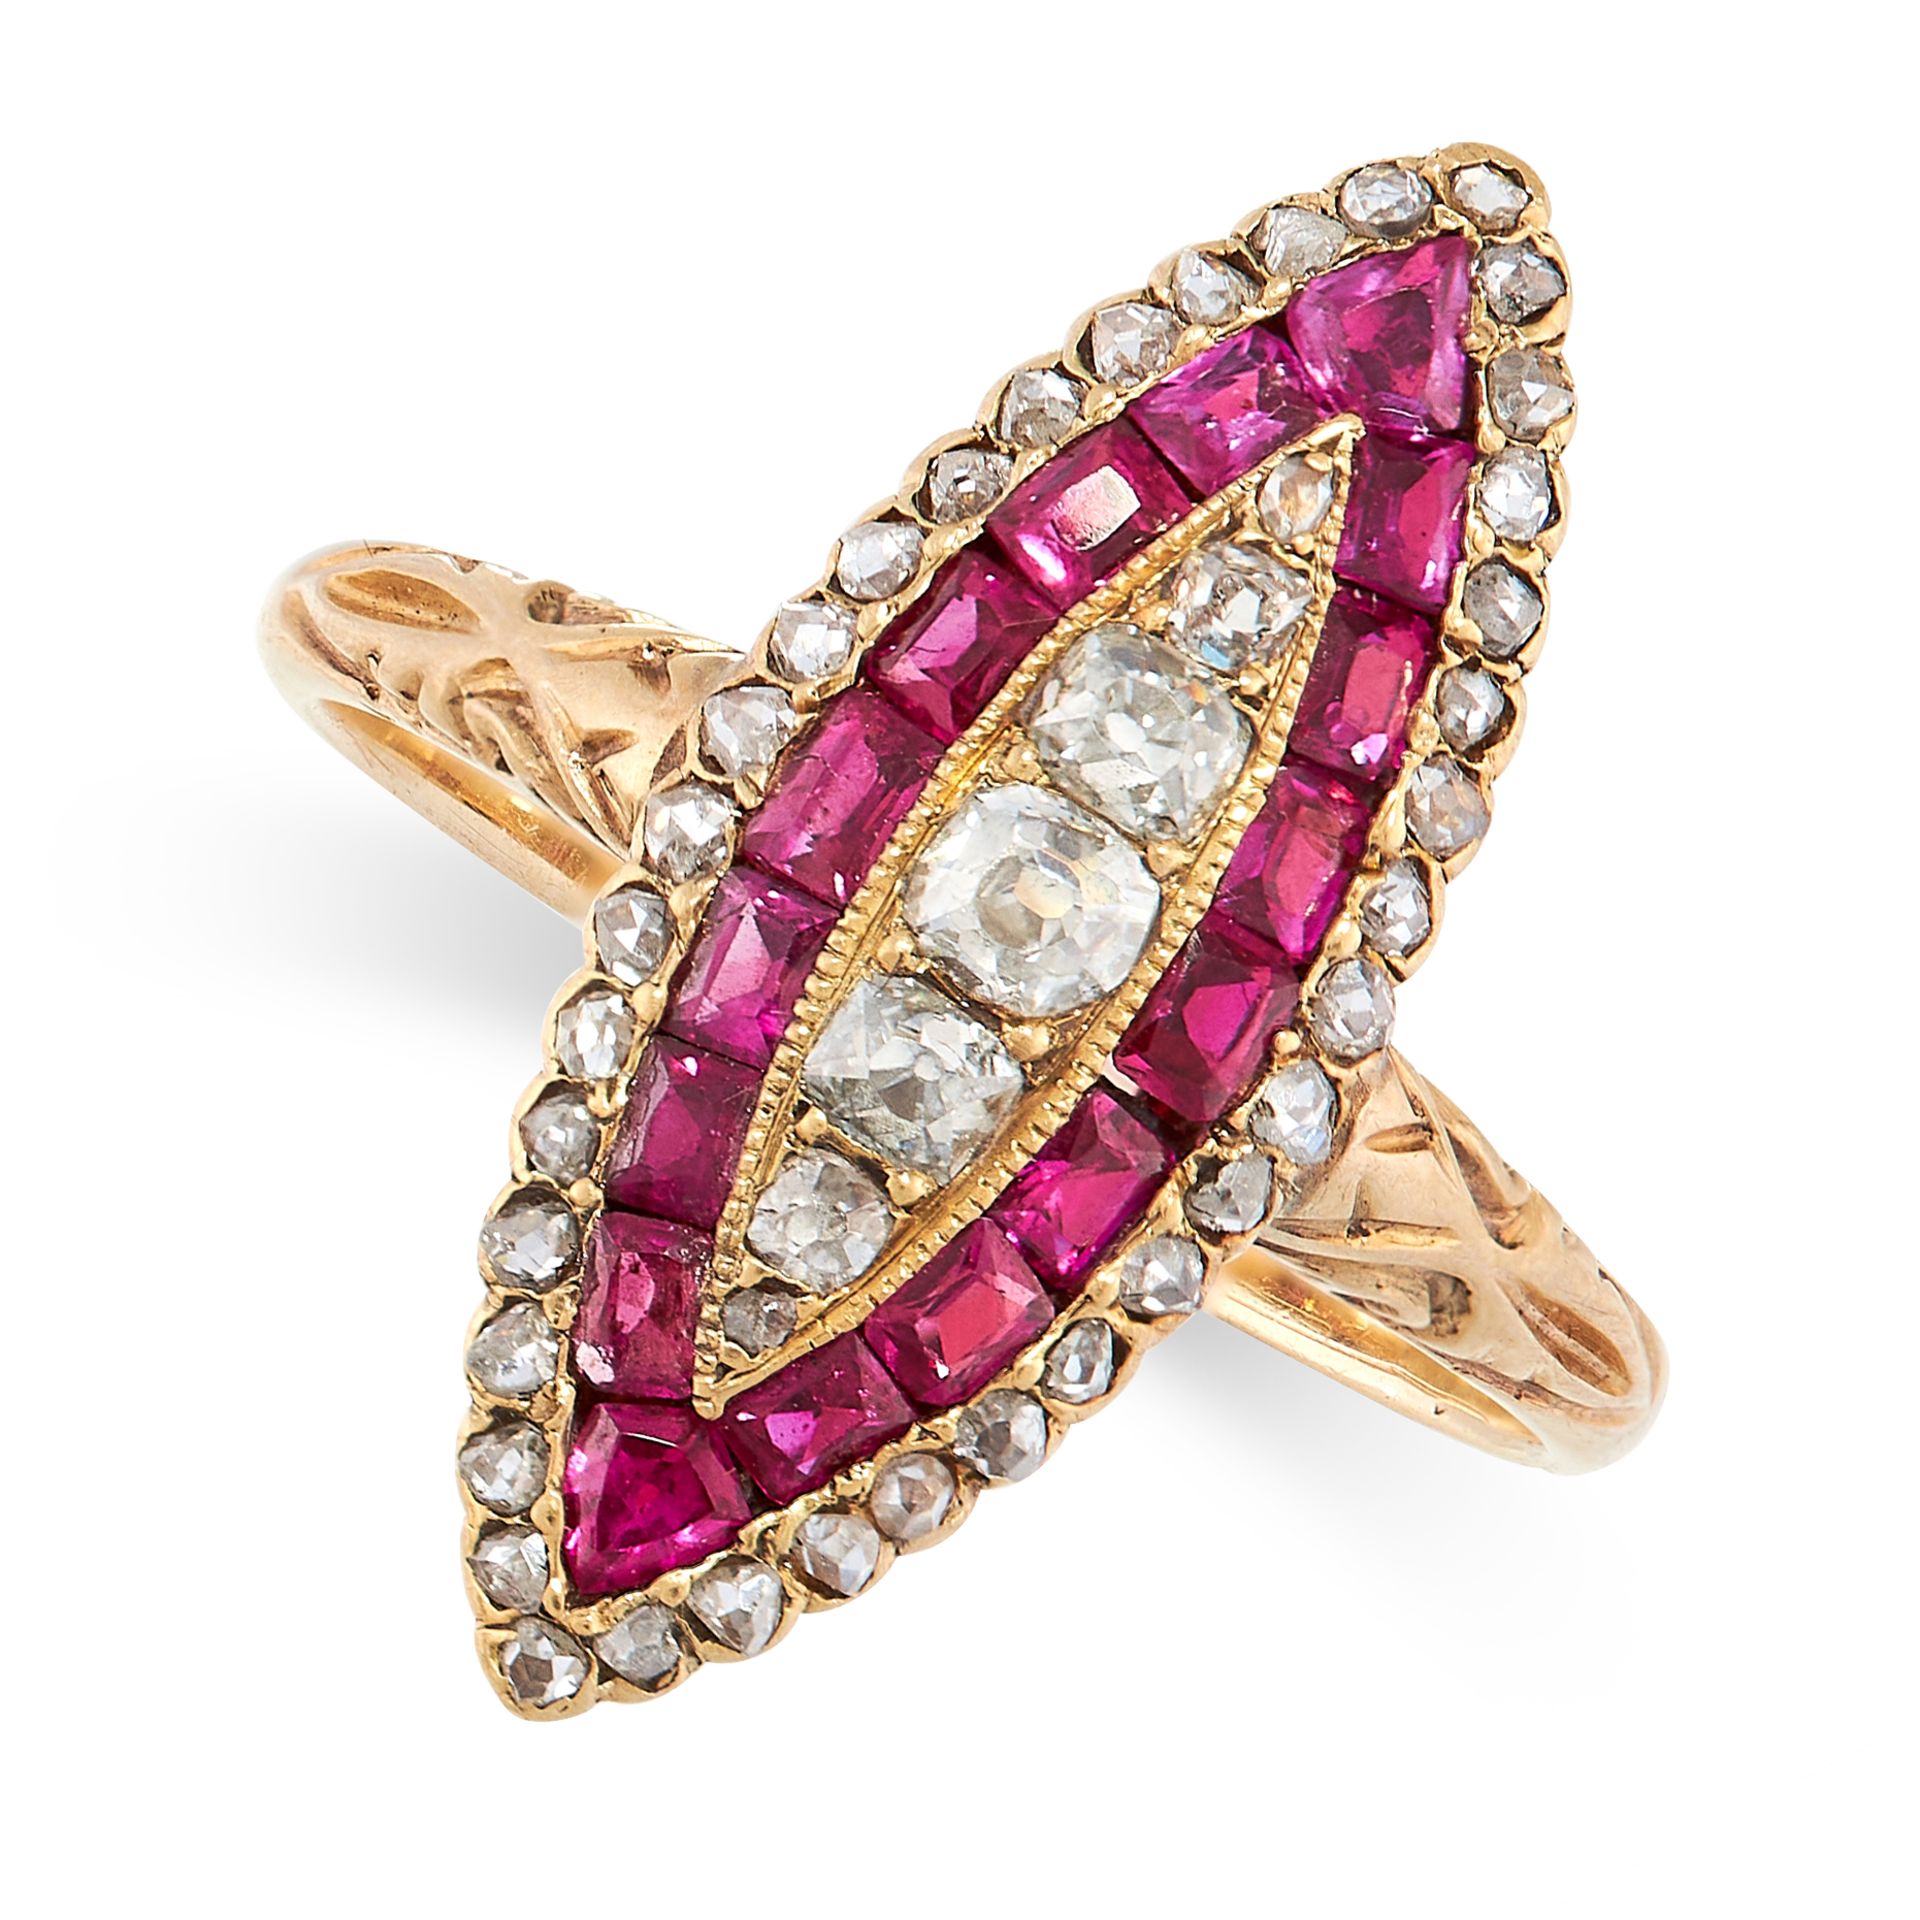 ANTIQUE RUBY AND DIAMOND RING in 18ct yellow gold, in marquise form, set with a central row of old